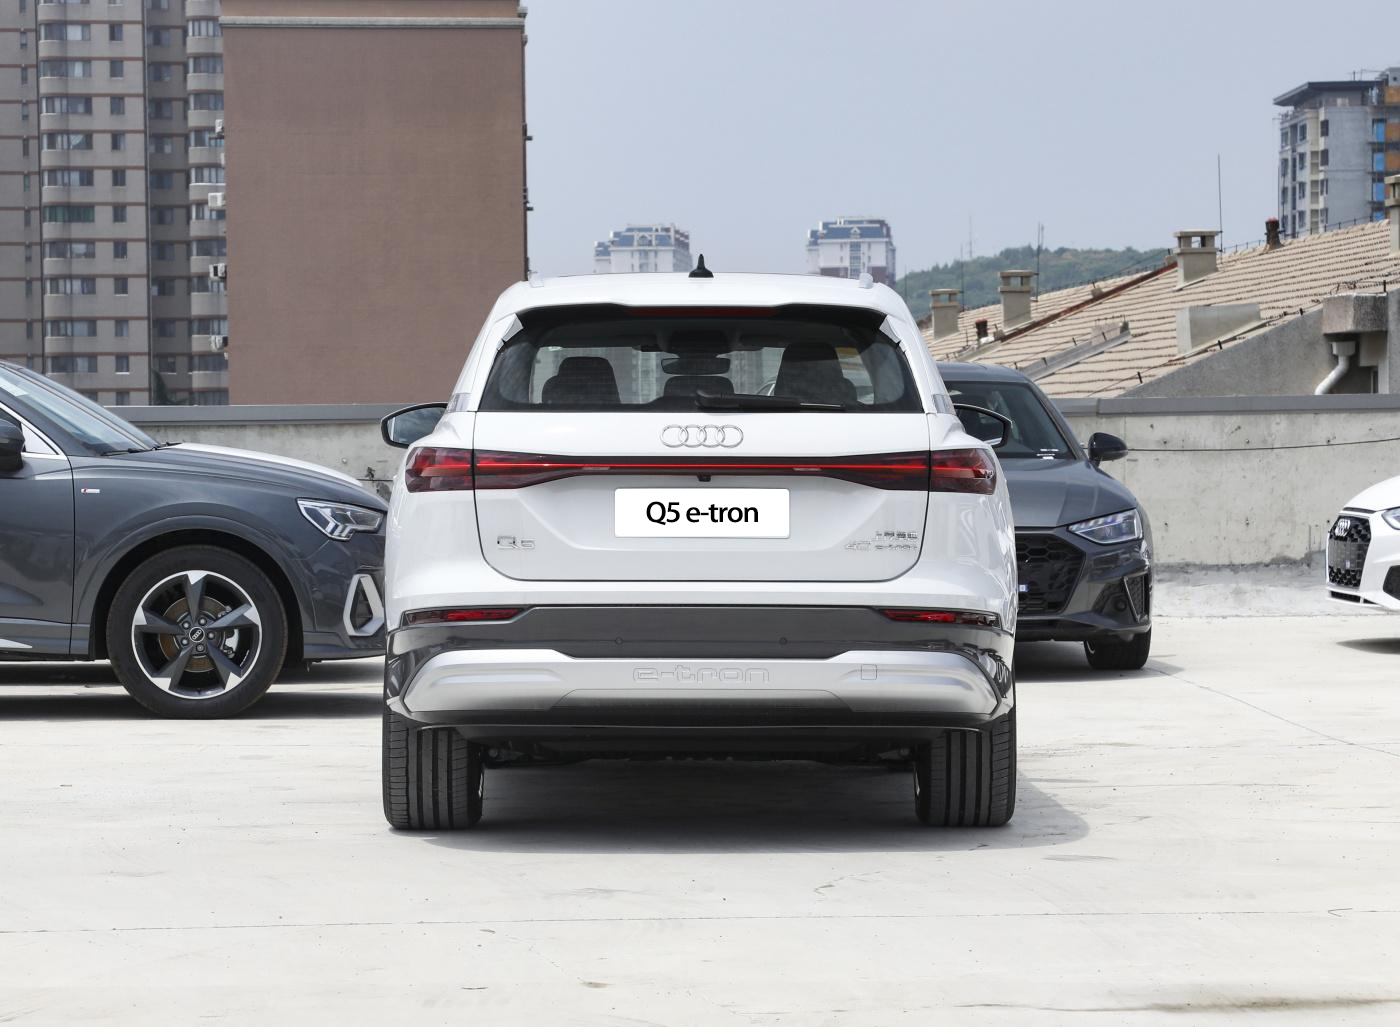 2024 Audi Q5 E-Tron Large Electric SUV Support Export Trade in China - Audi - 5